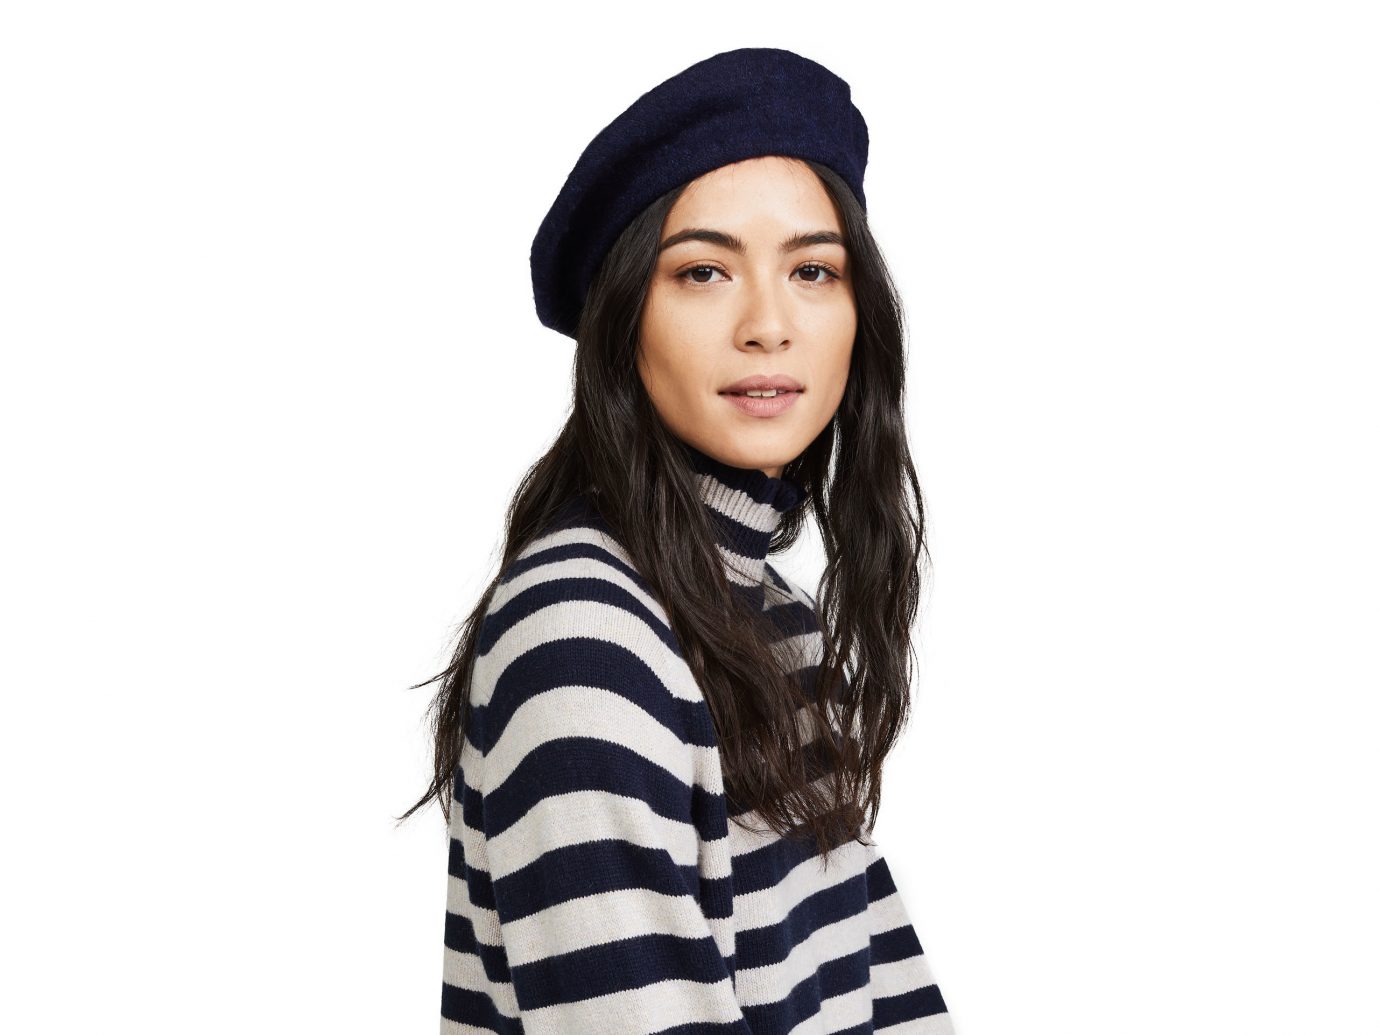 Travel Shop Travel Trends person clothing headgear cap beanie knit cap hat posing striped neck scarf pattern girl product